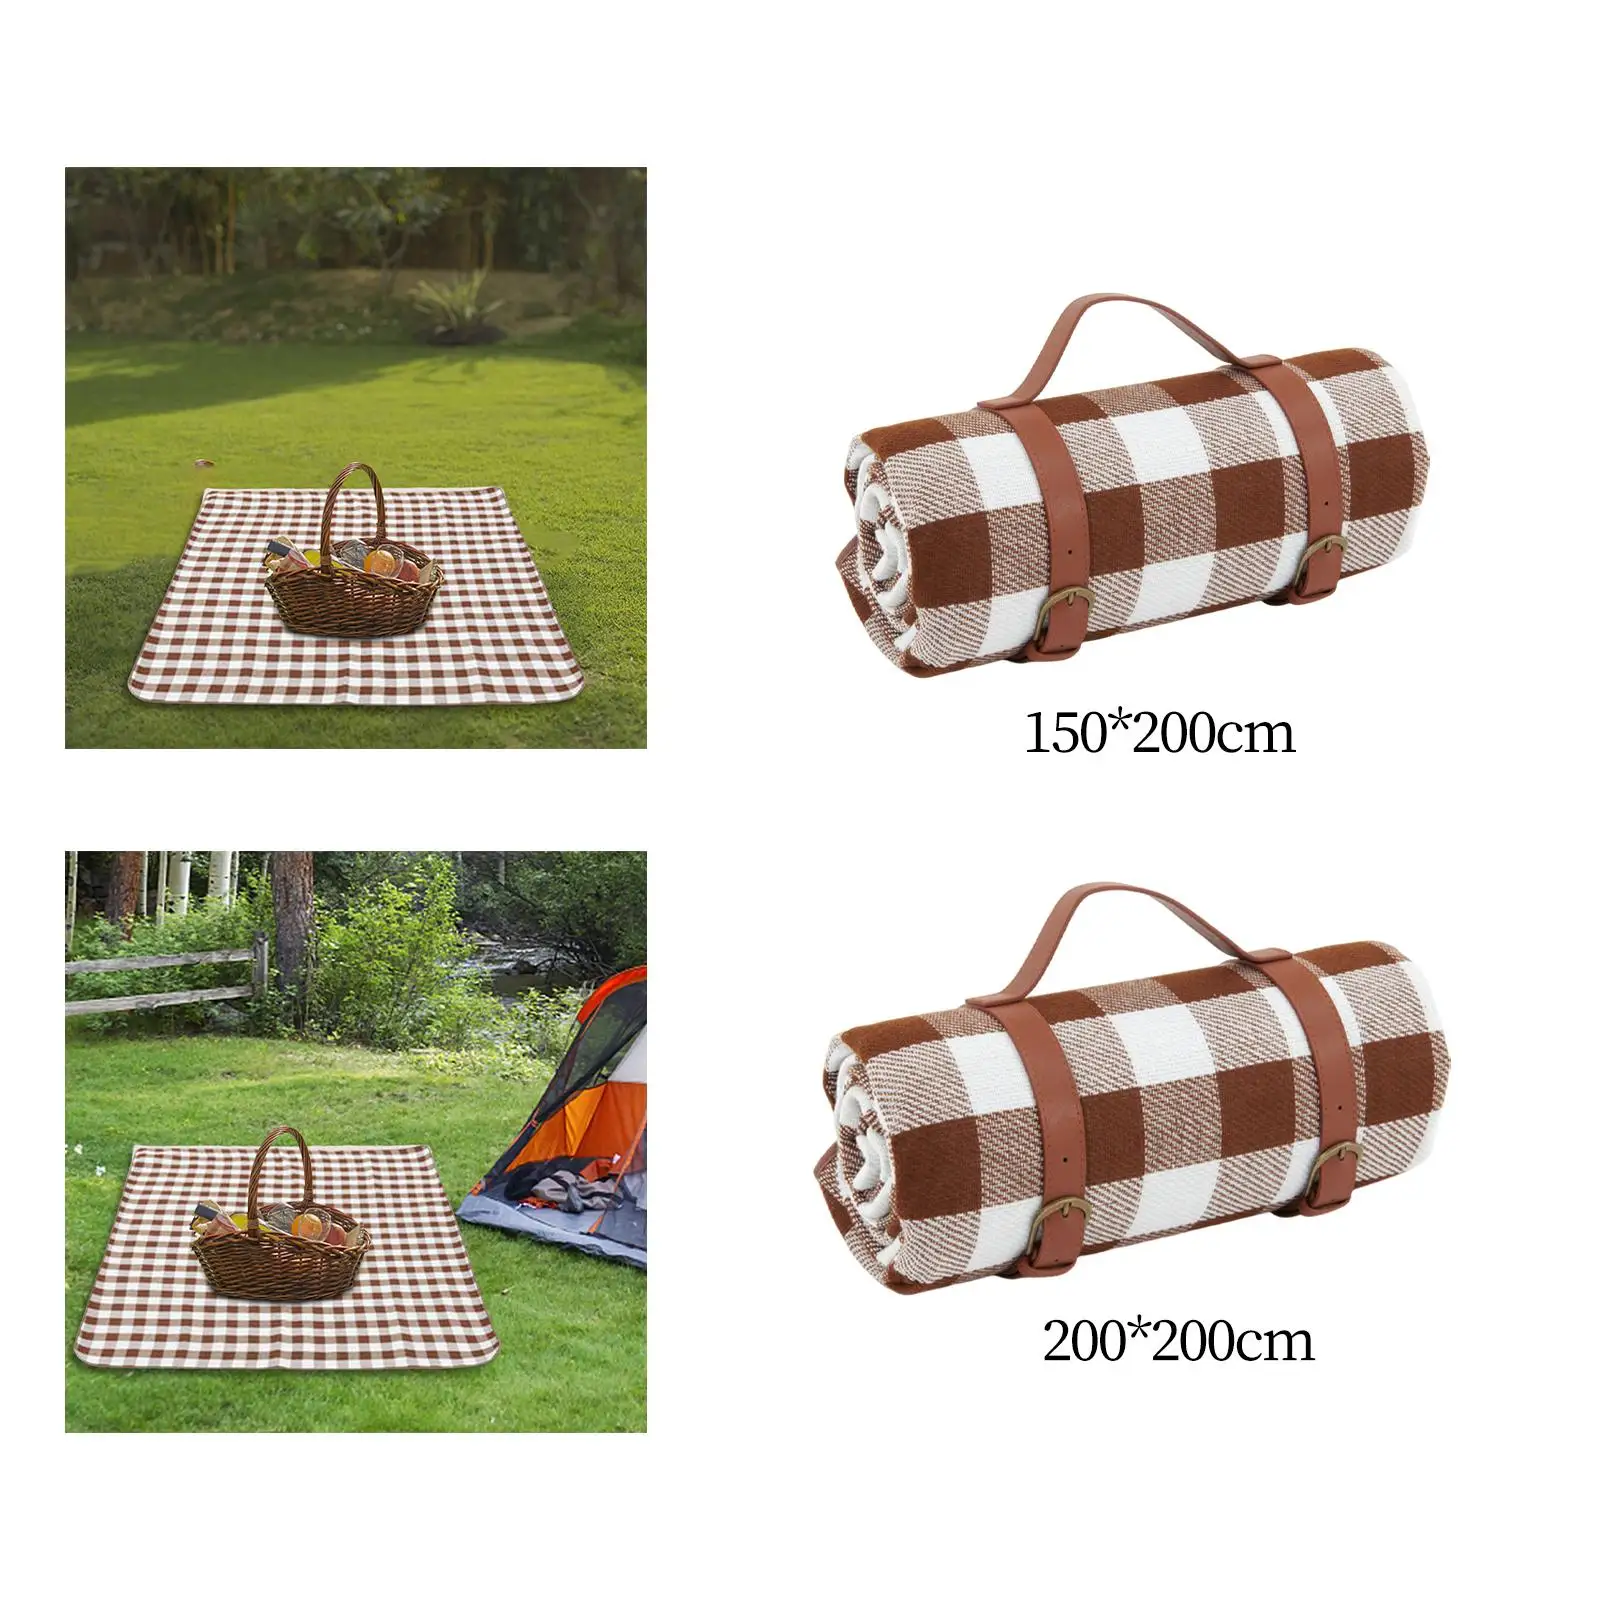 Picnic Blanket PU Leather Handle Outdoor Blanket Compact Rug for Camping Travel